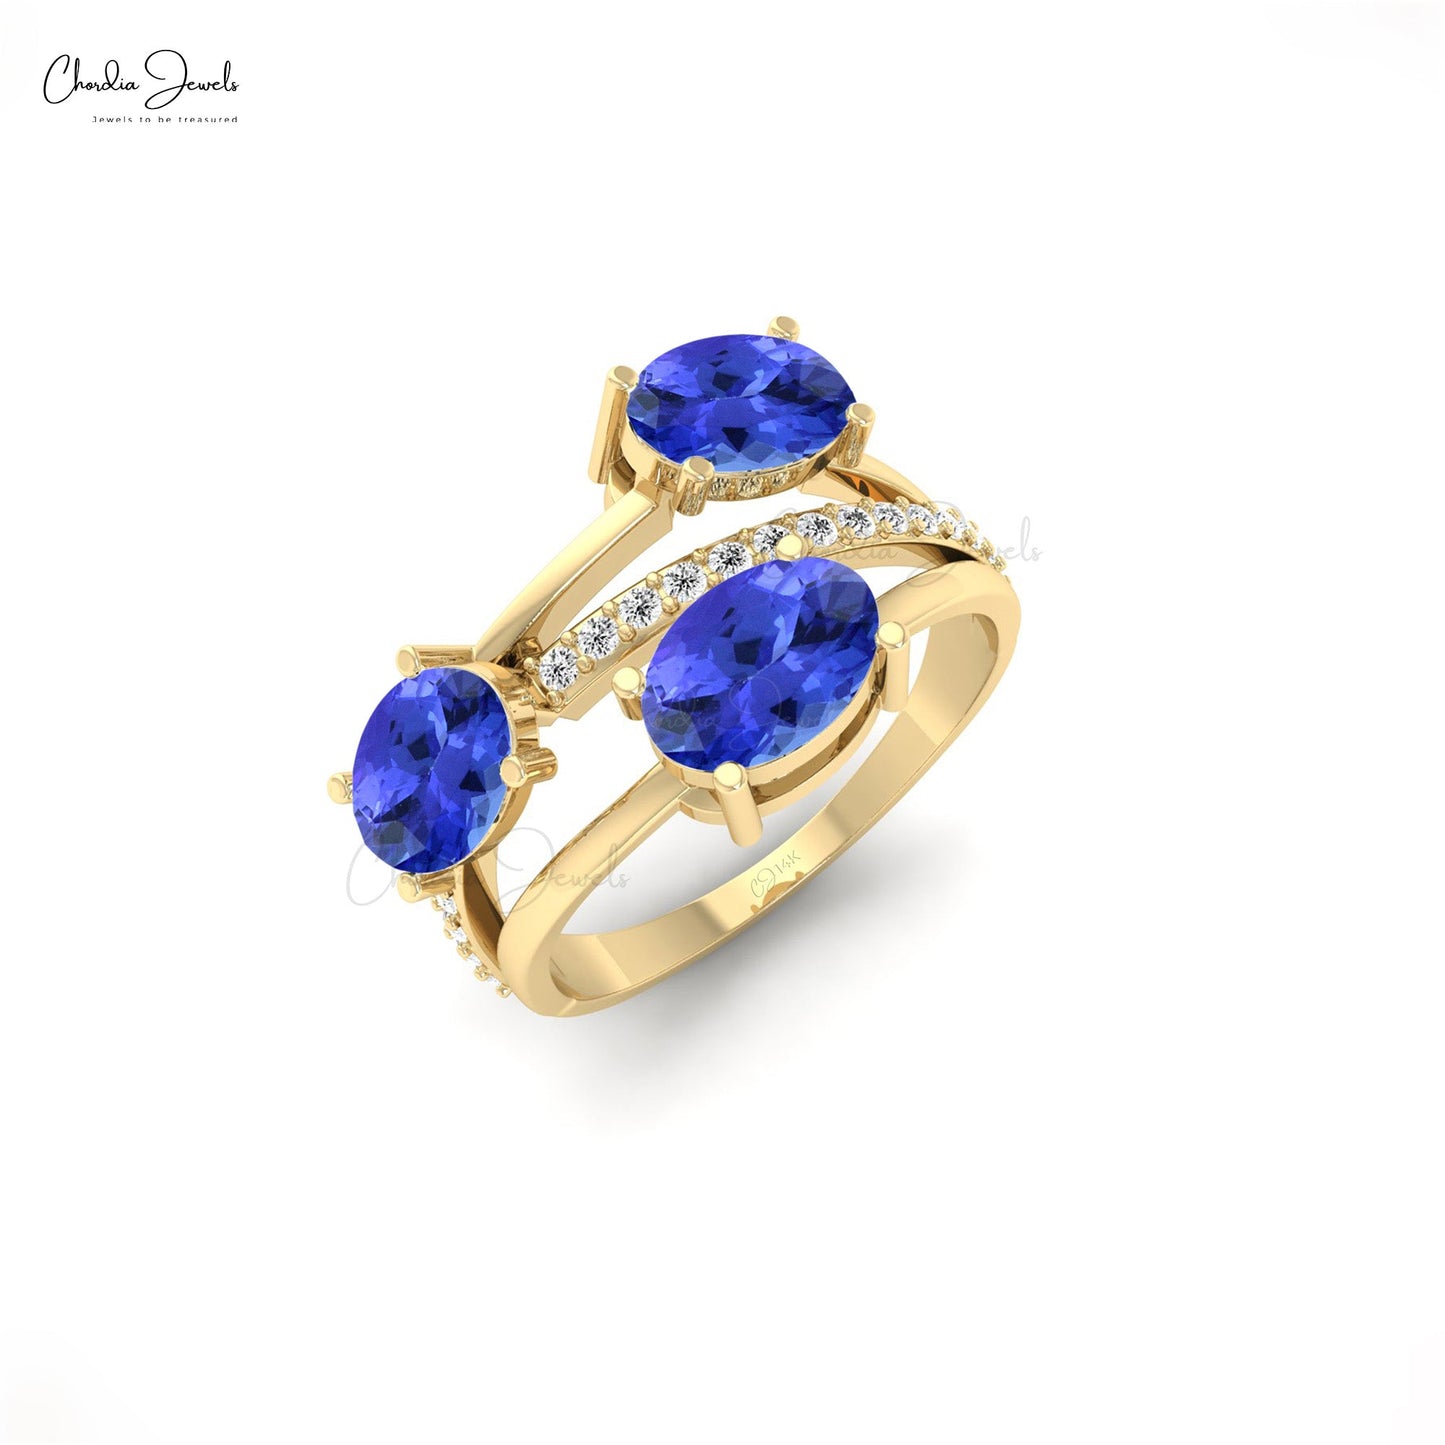 Split Shank Crossover Ring With Tanzanite Gemstone 14k Solid Gold Diamond Accents Ring